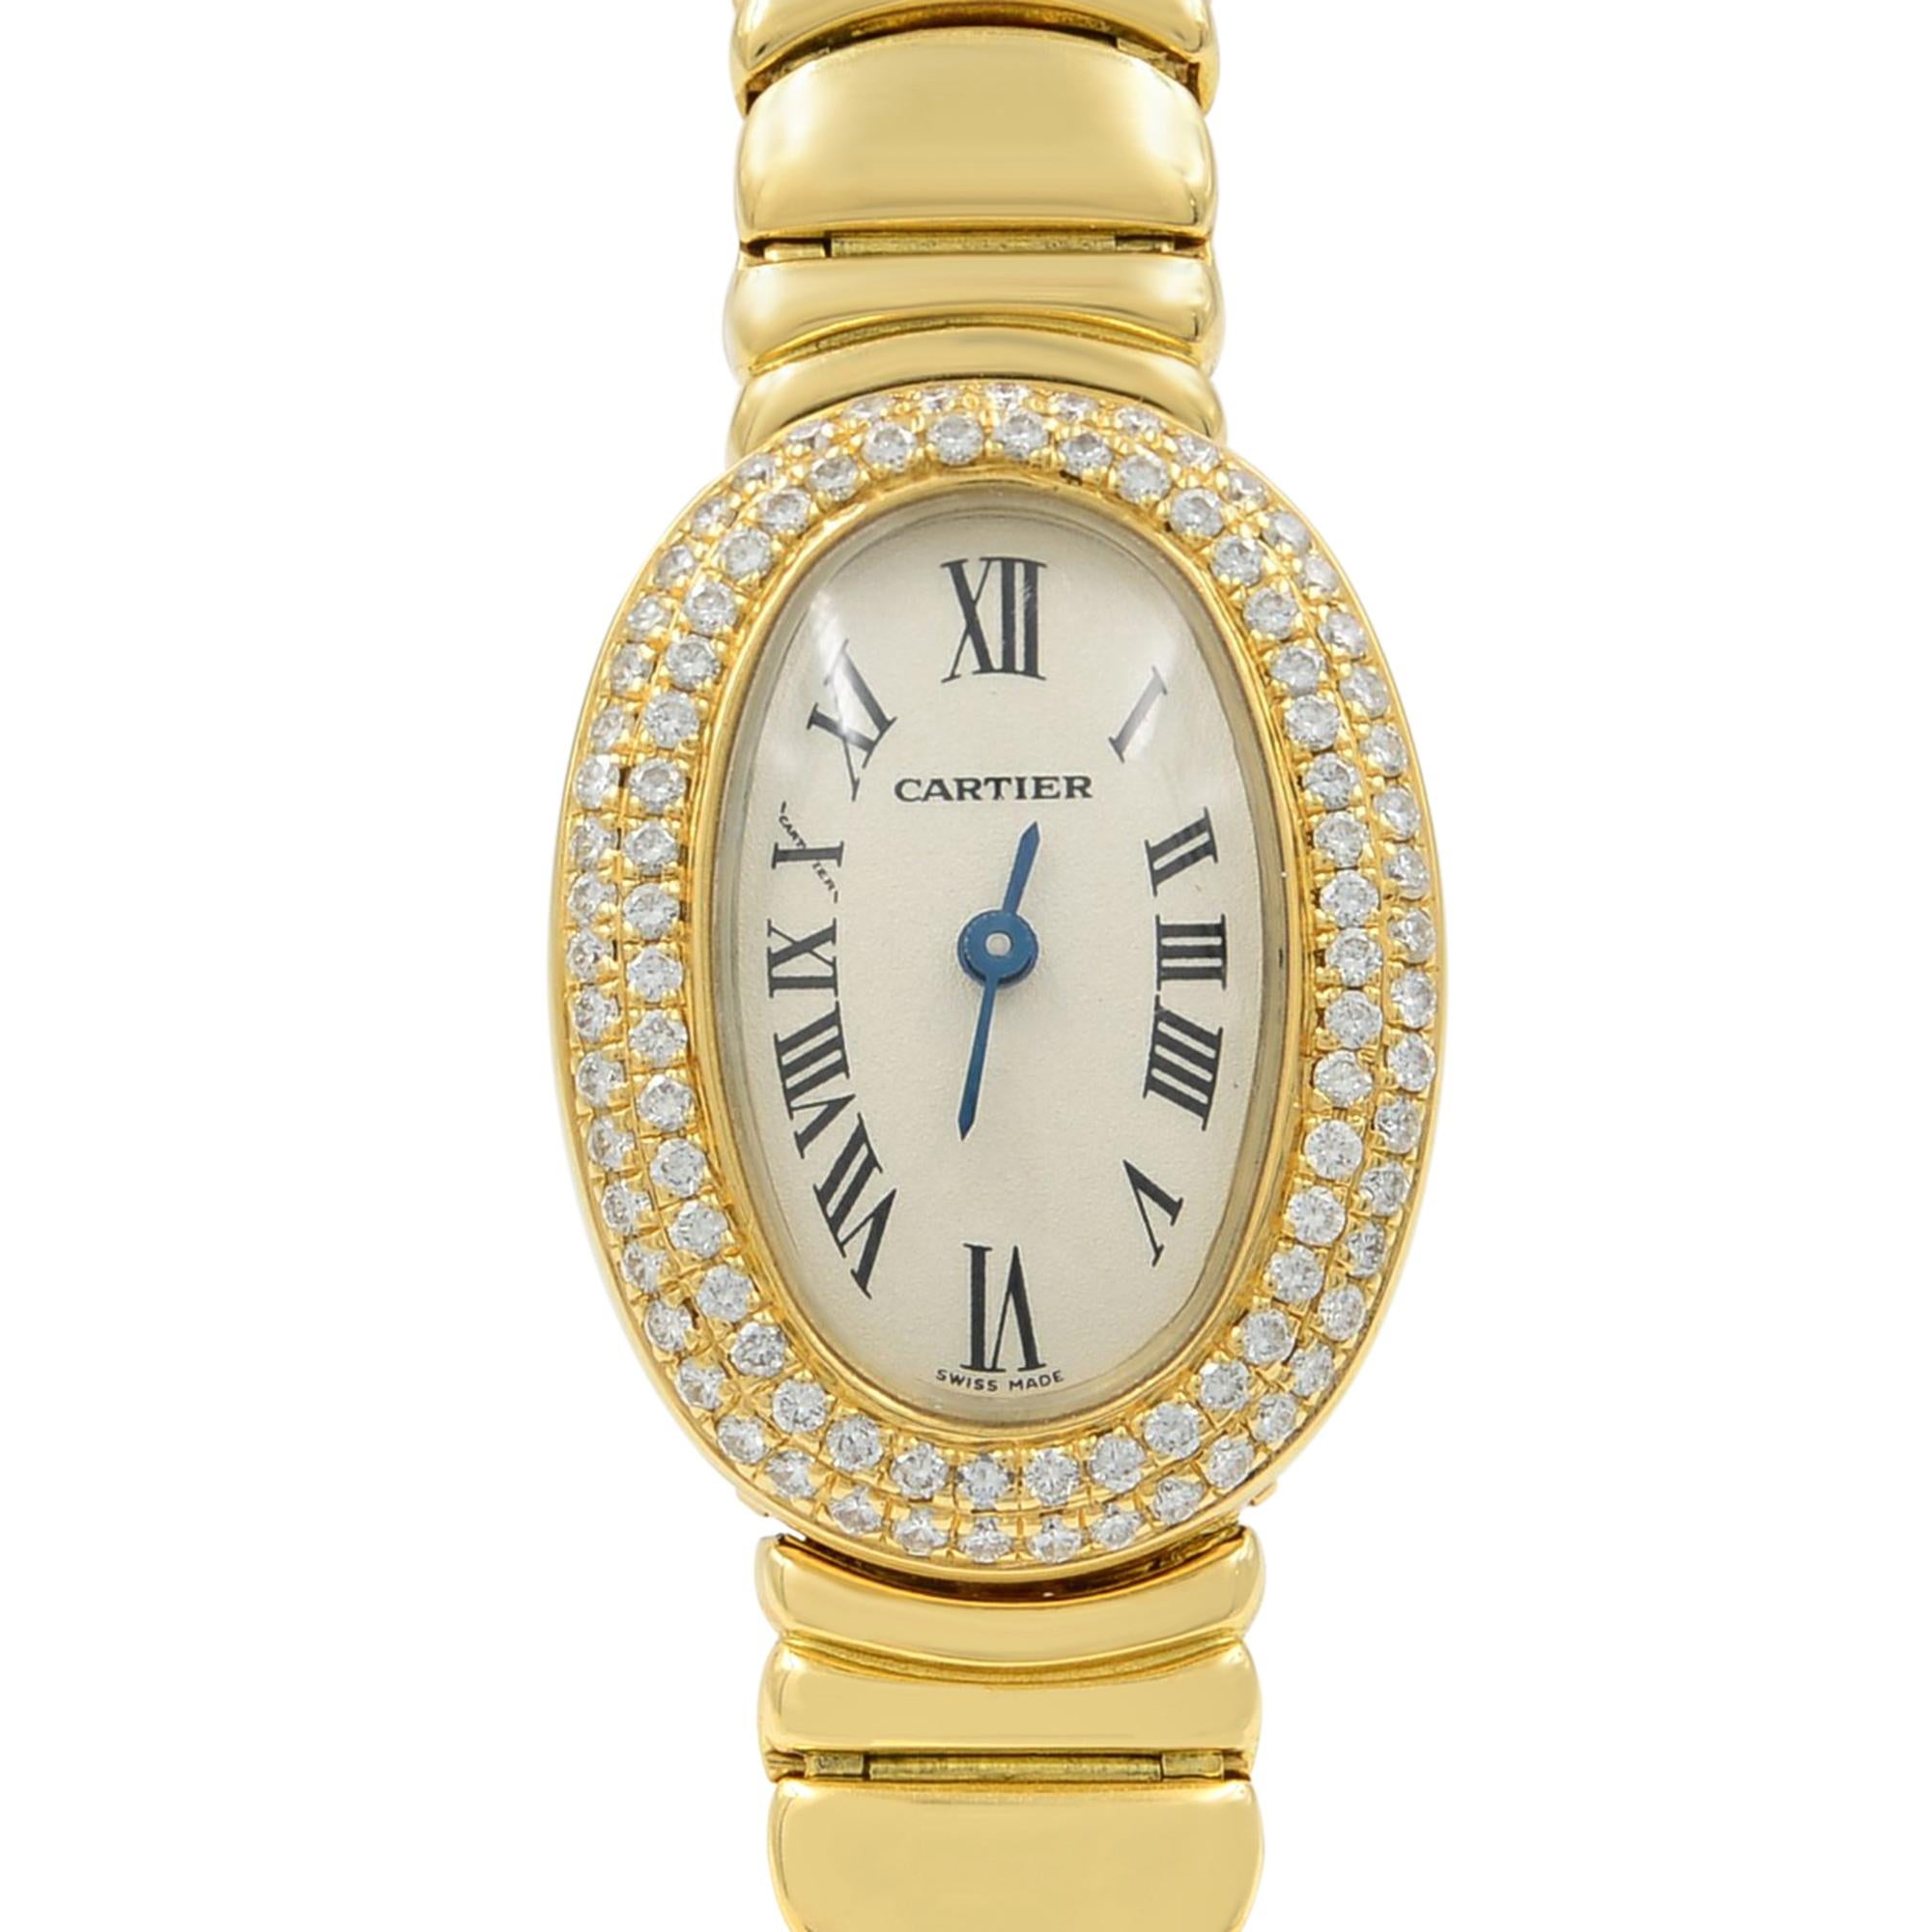 This pre-owned Cartier Baignore  WB5094WI is a beautiful Ladie's timepiece that is powered by quartz (battery) movement which is cased in a yellow gold case. It has a oval shape face, diamonds dial and has hand roman numerals style markers. It is